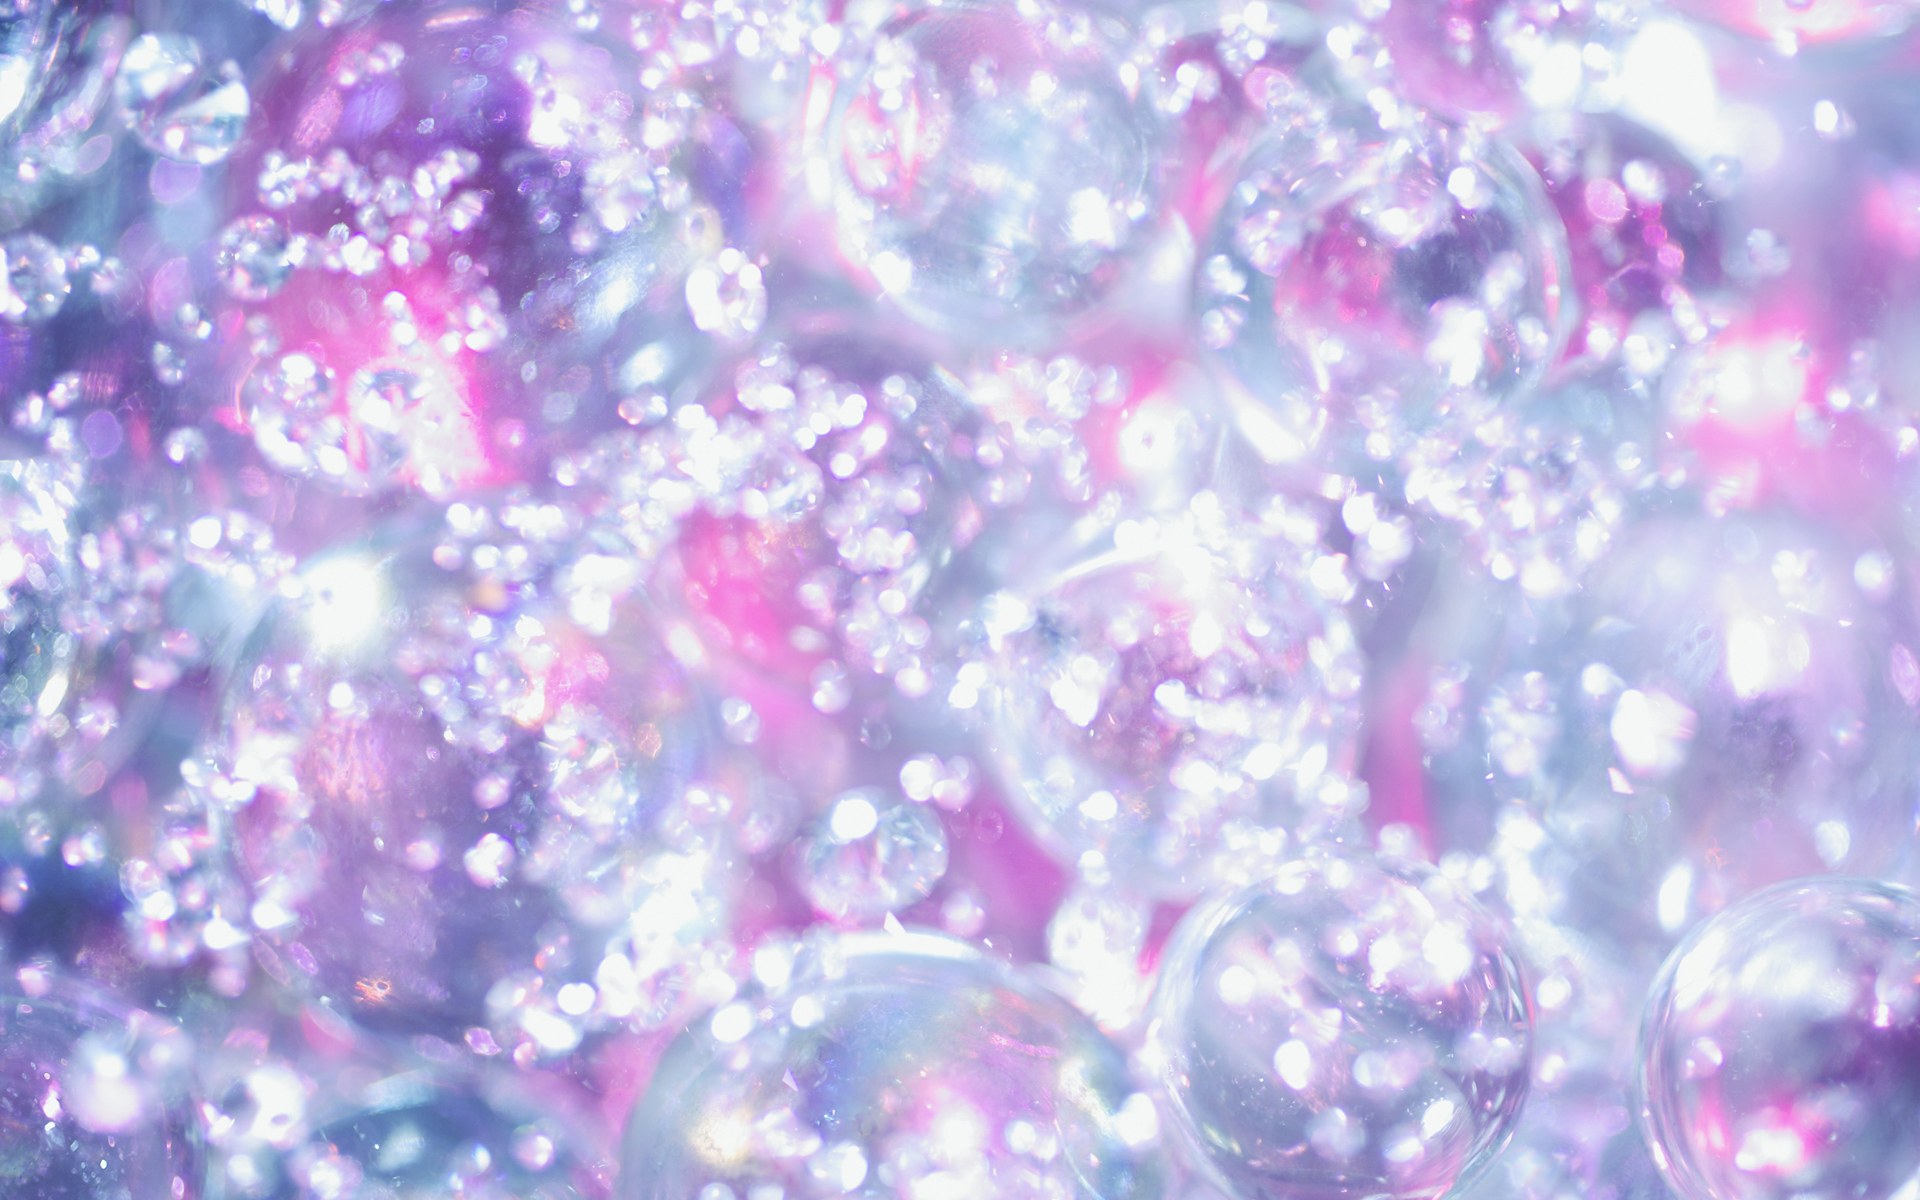 Sparkling And Romantic Background Hk018 350a Is A Great Wallpaper For